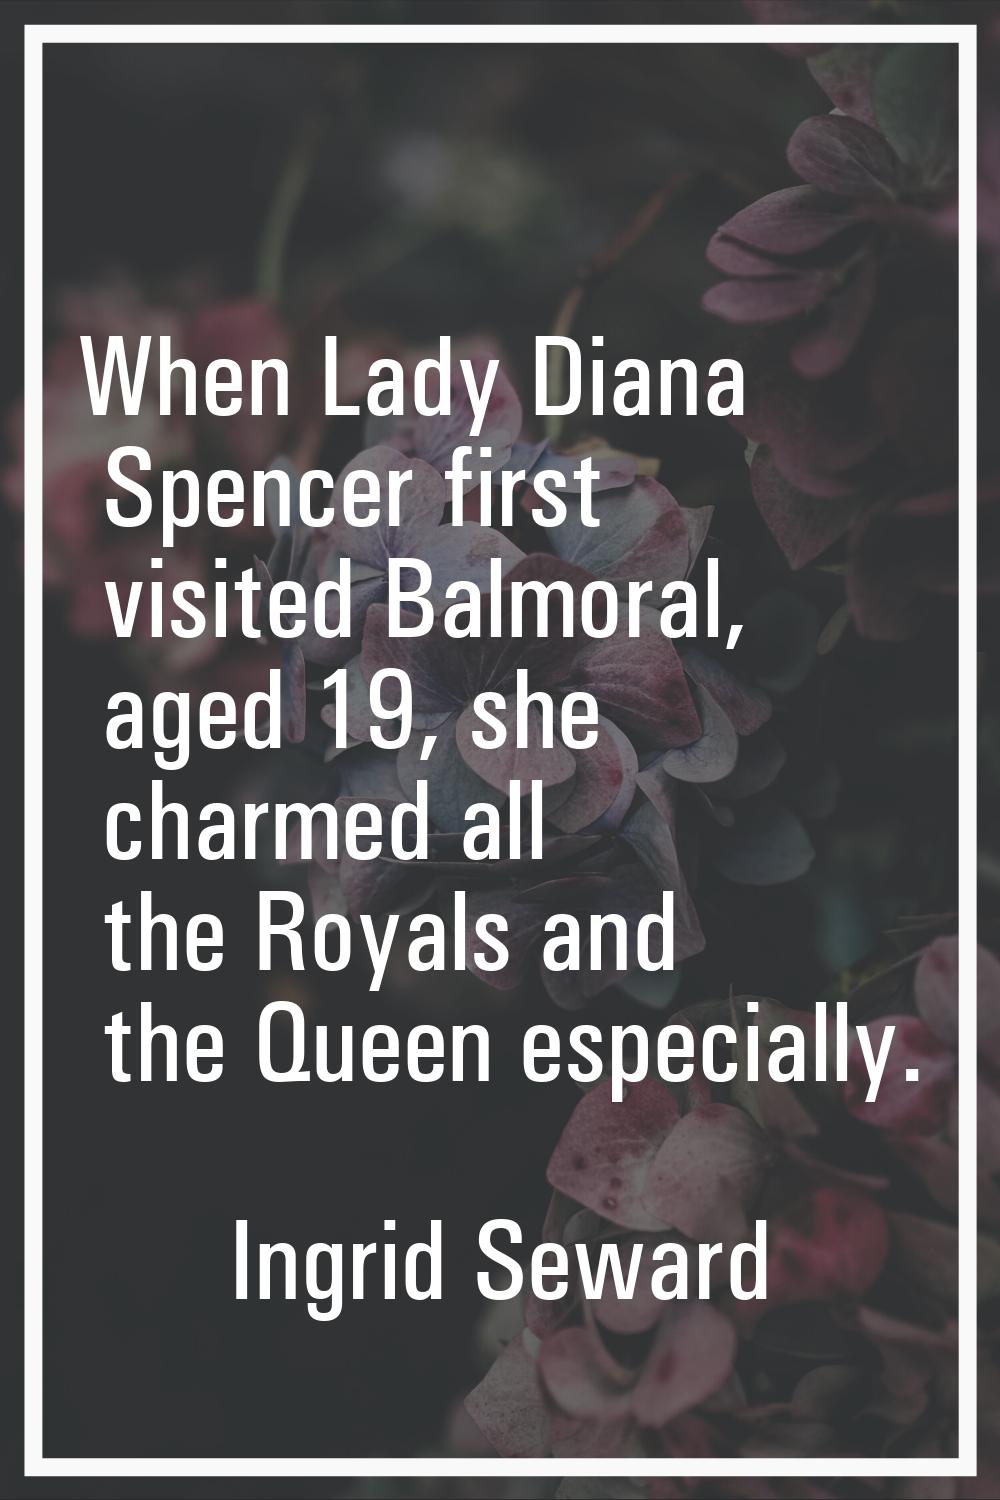 When Lady Diana Spencer first visited Balmoral, aged 19, she charmed all the Royals and the Queen e